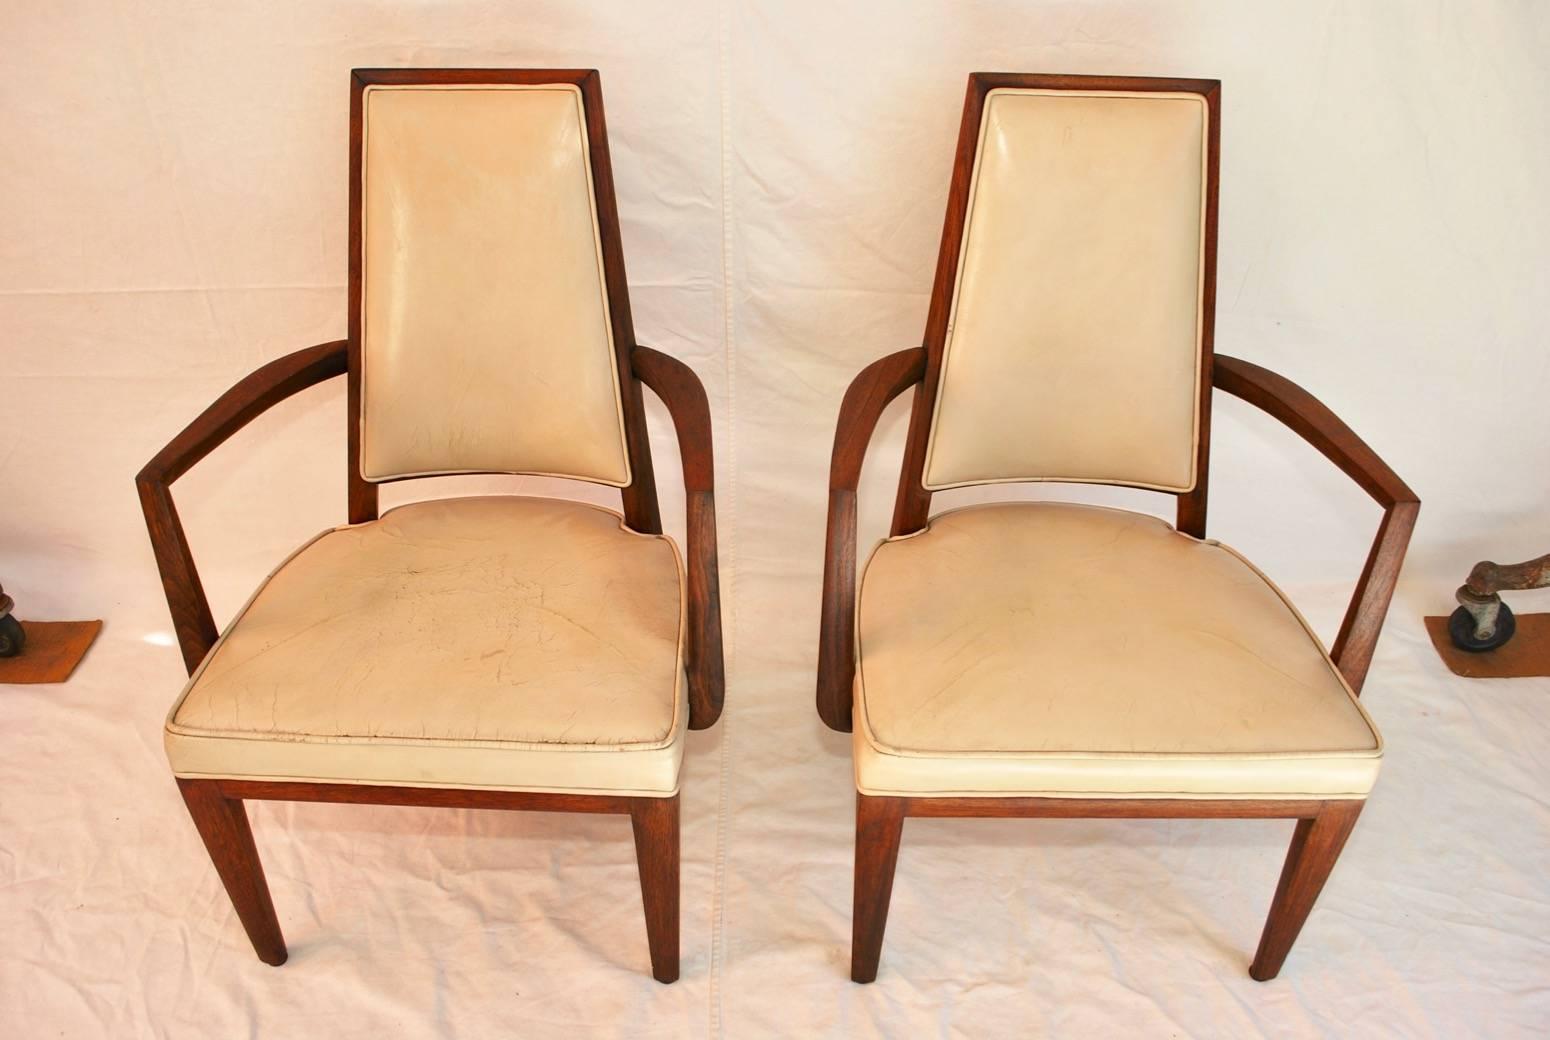 The chairs has it original leather, we have a set of four, the price is for the pair.
The patina is a lot nicer in person.